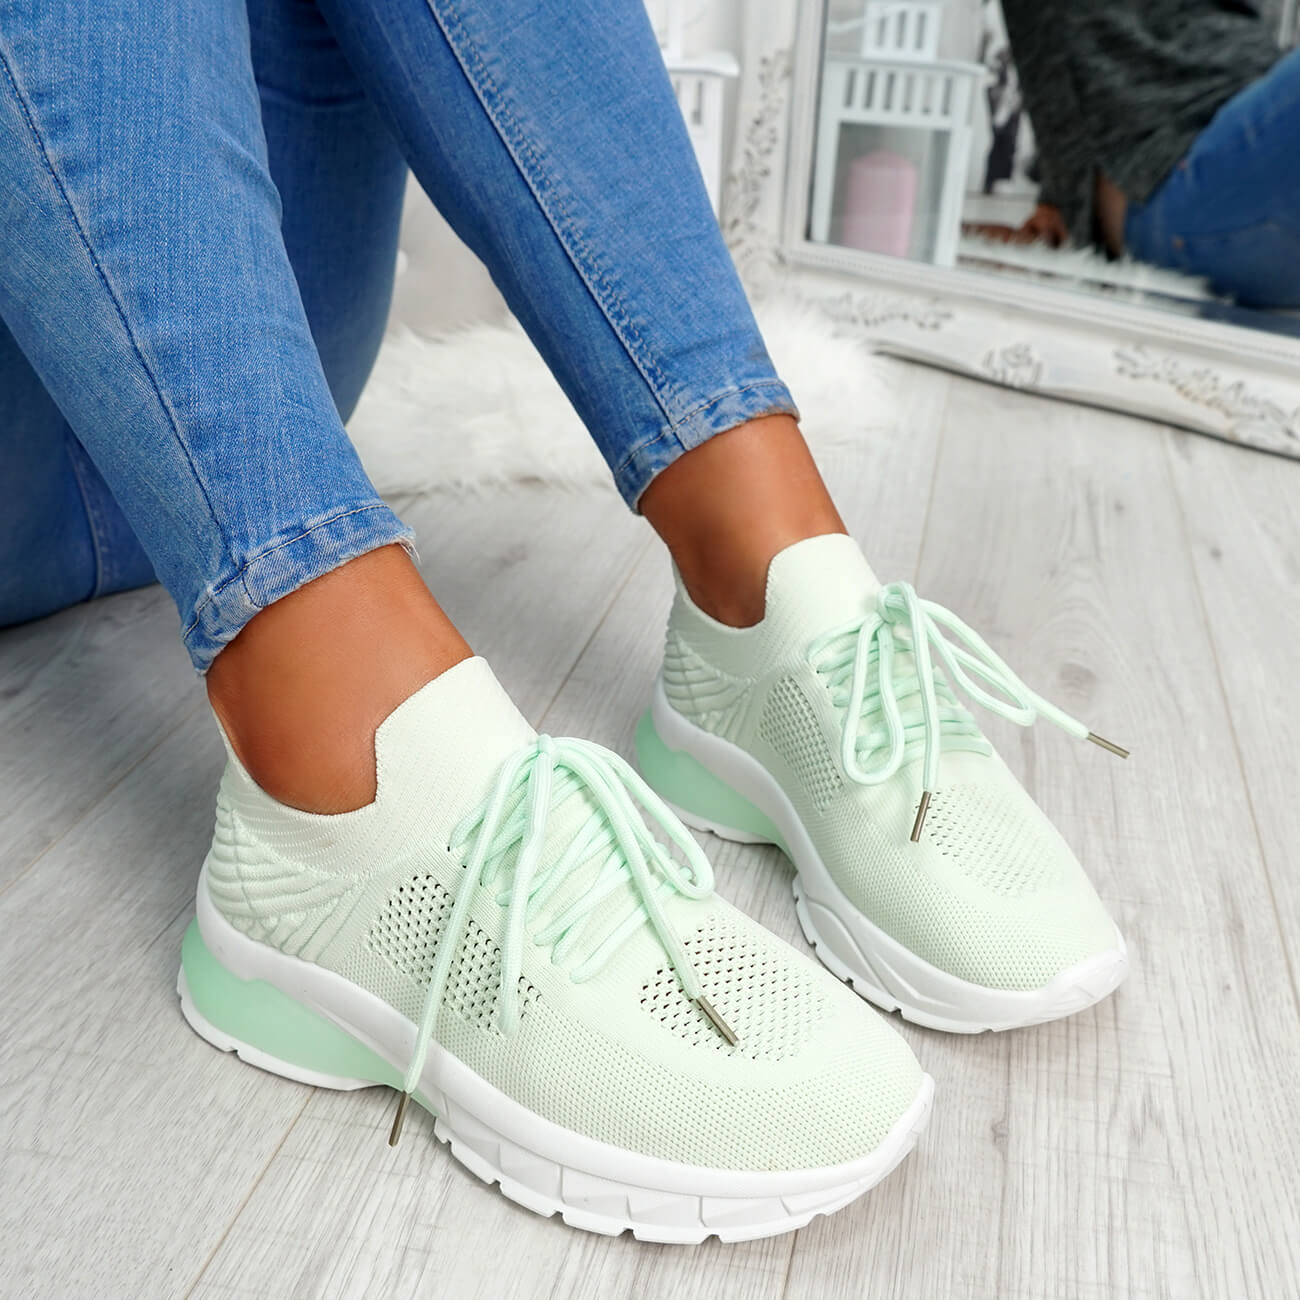 Cheap ladies trainers online